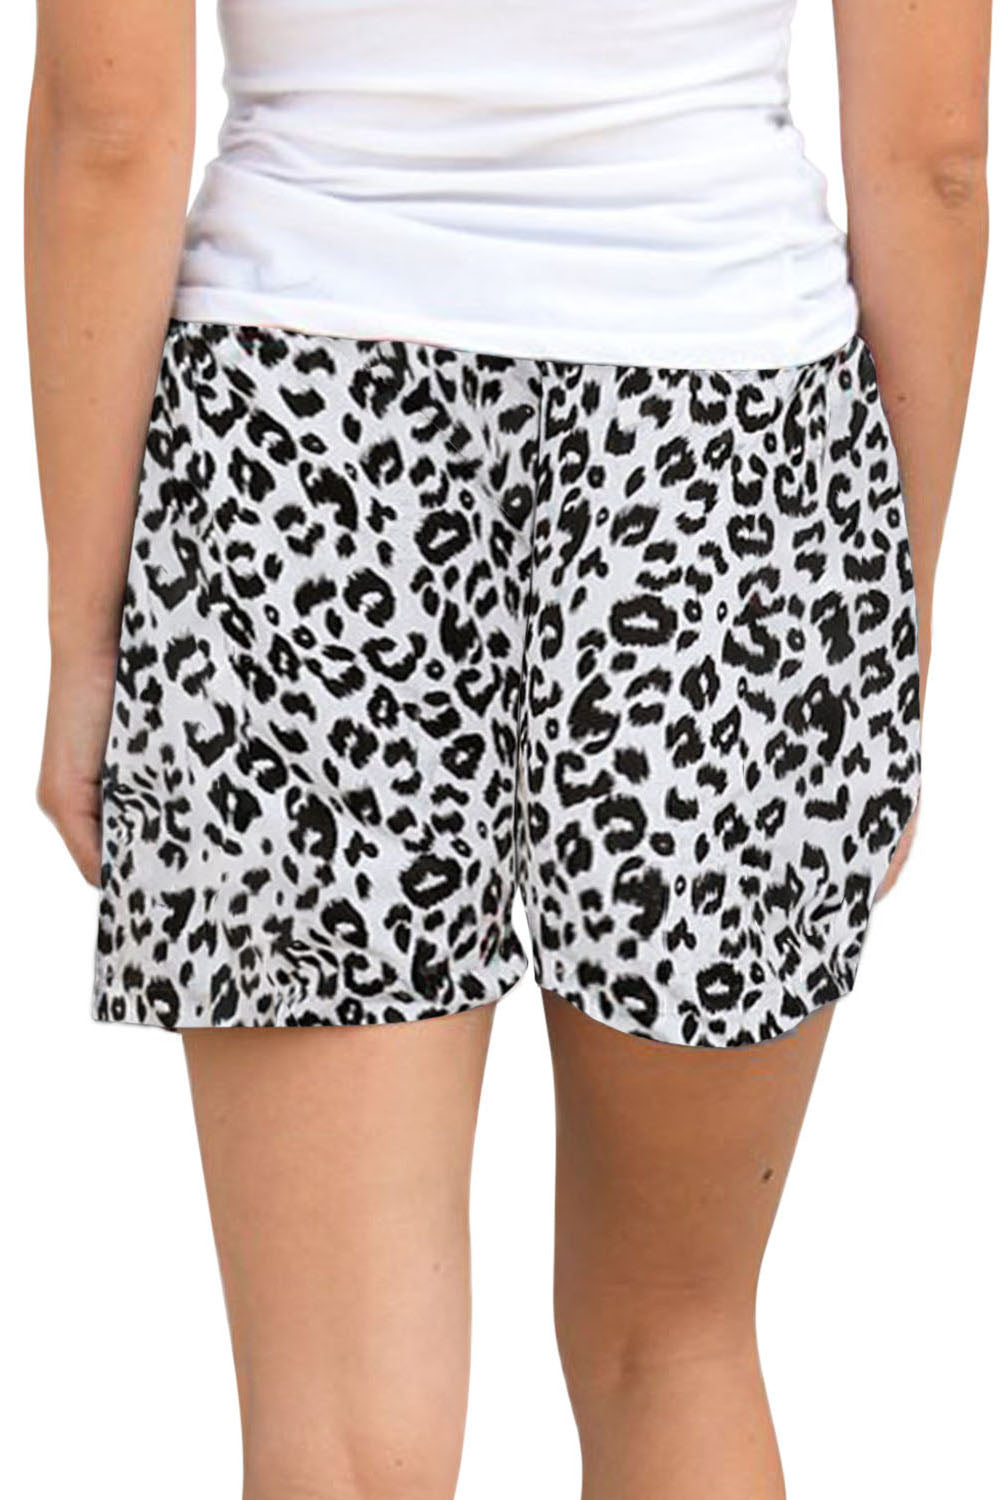 White Leopard Print Shorts - Southern Grace Creations